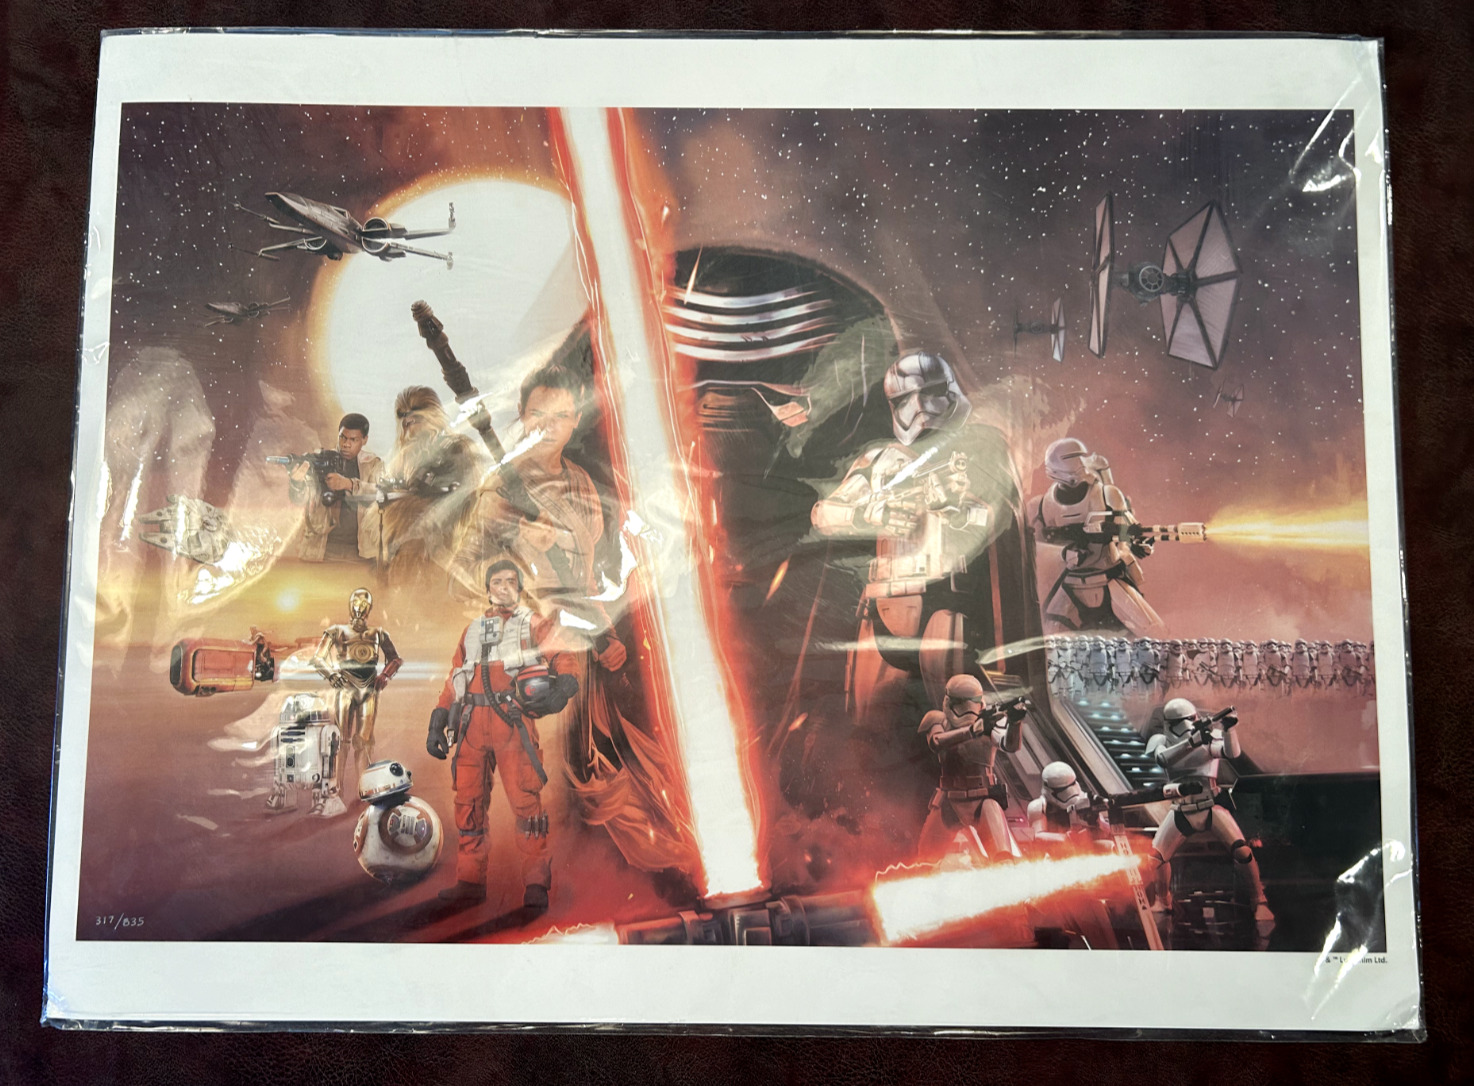 STAR WARS THE FORCE AWAKENS LITHOGRAPH PRINT 24x18 W/COA AND ORIG PACKAGING